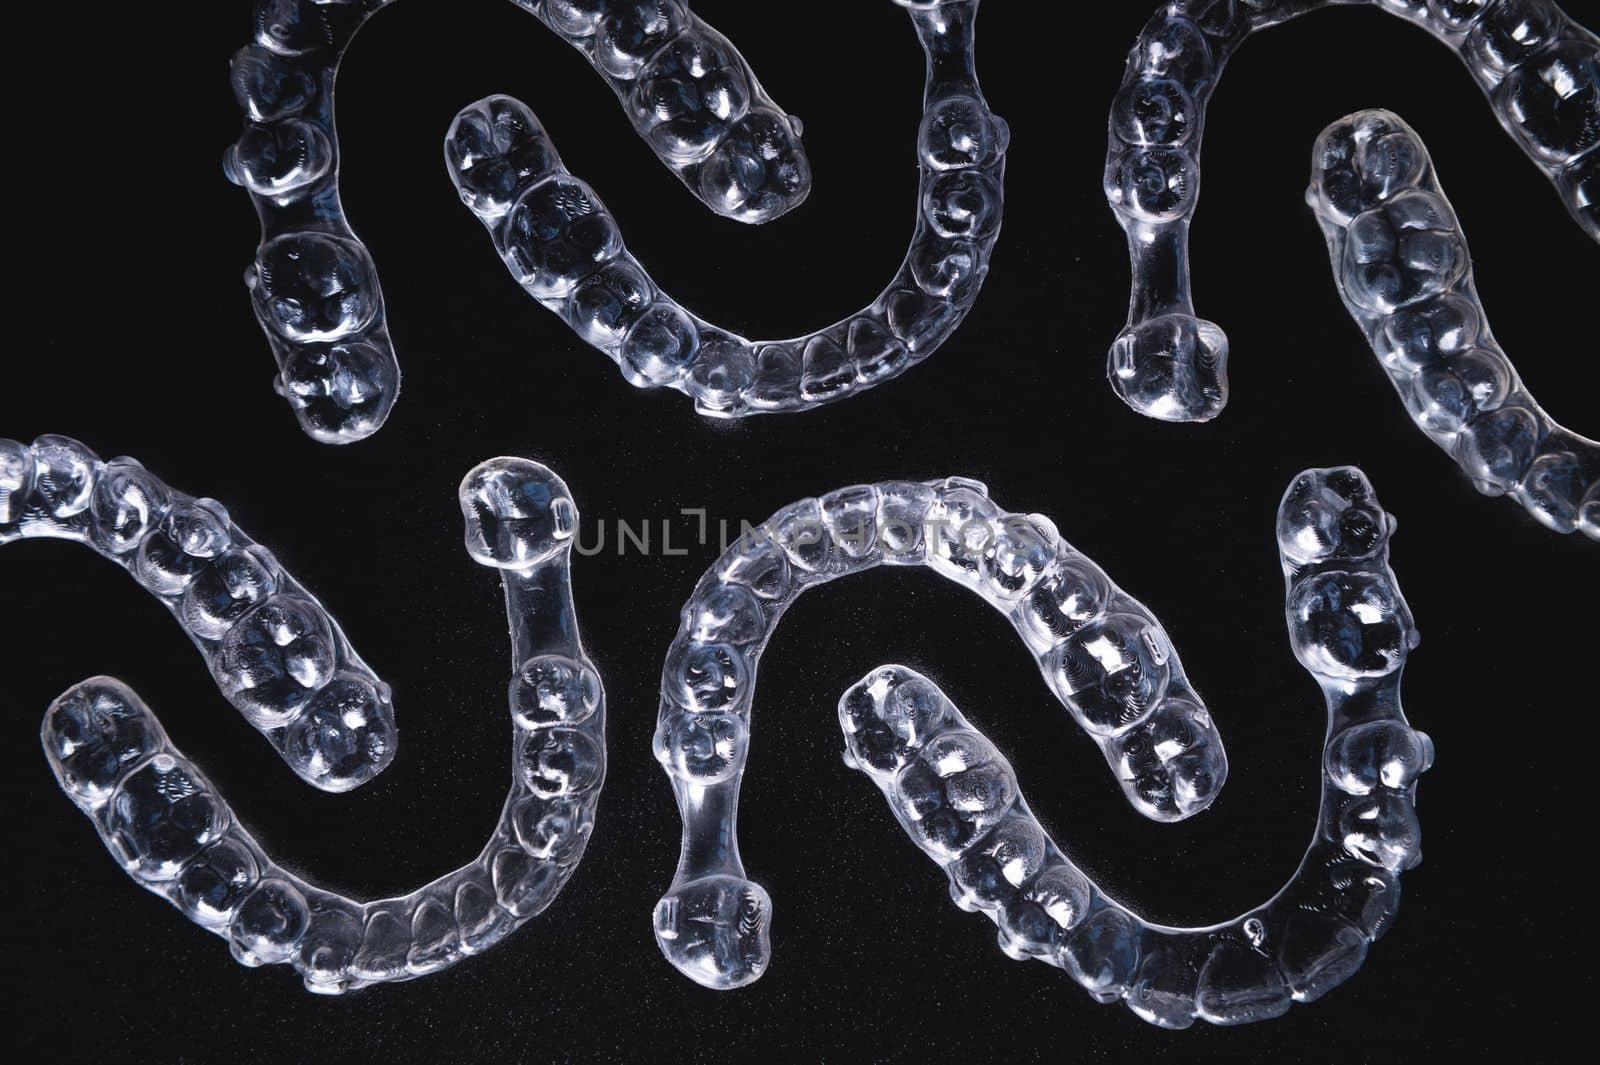 a pattern of invisible plastic aligners lie on a black background.